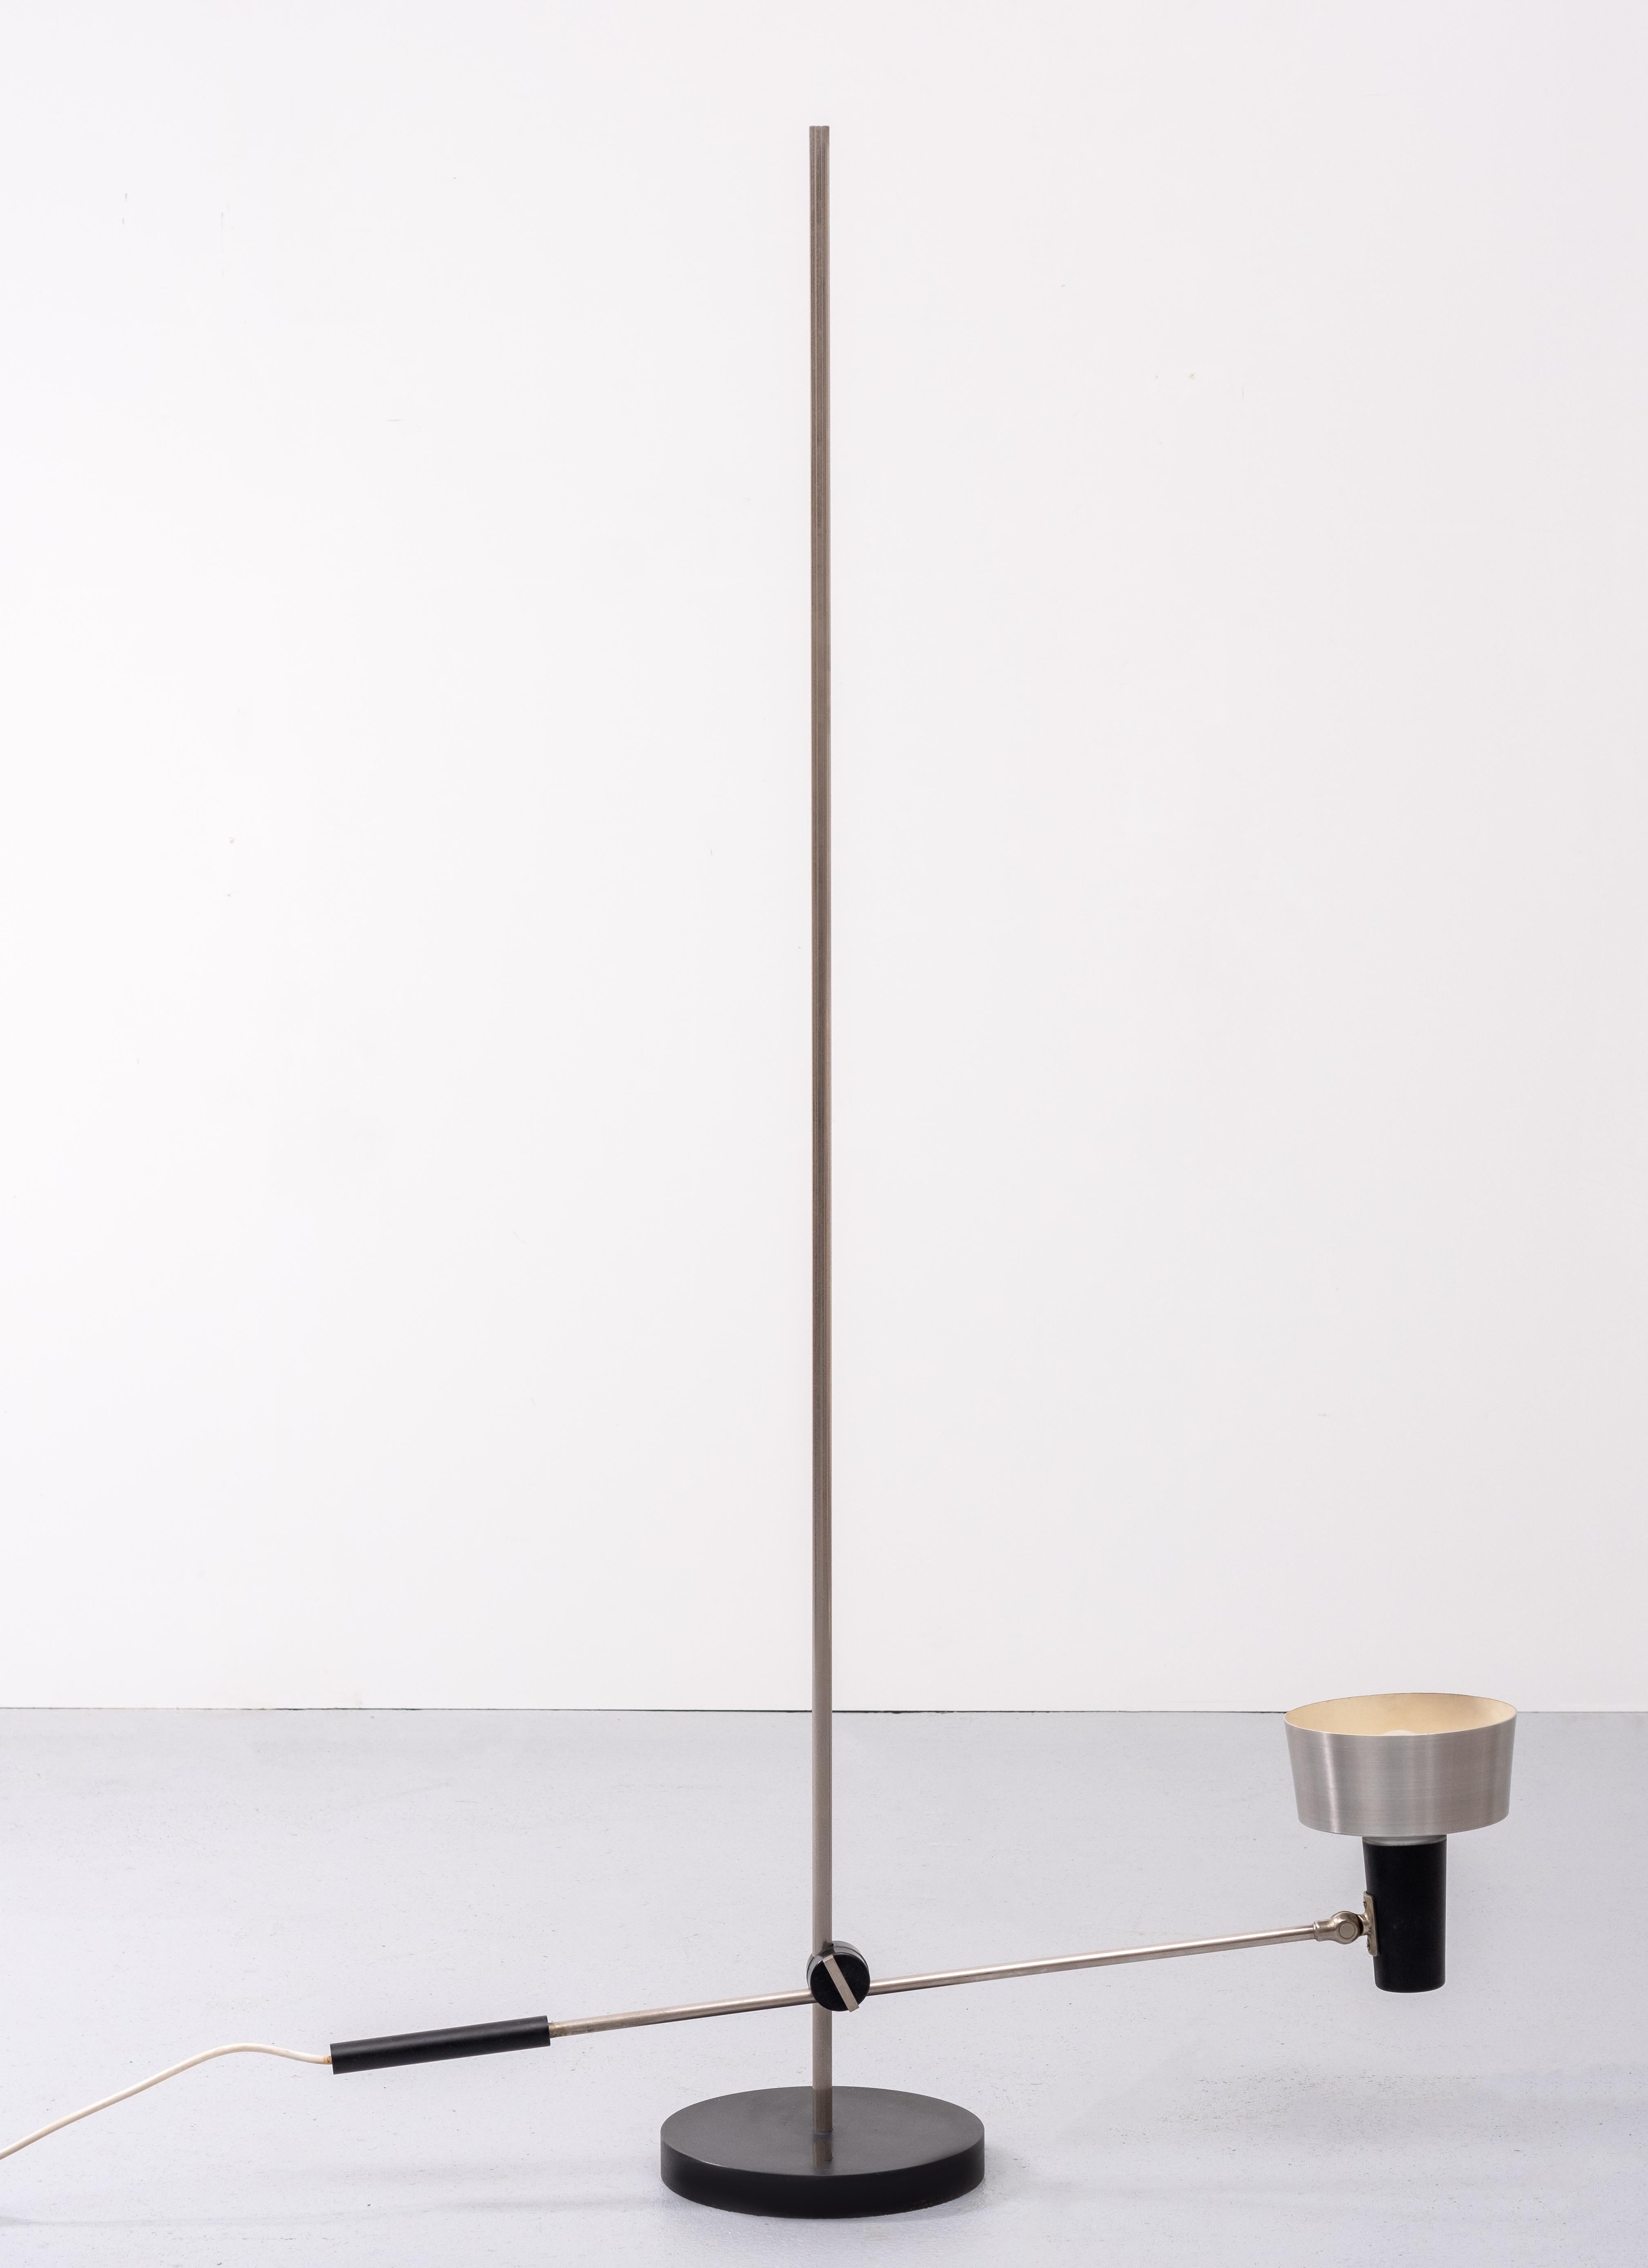 Adjustable Anvia floor lamp designed by J. Hoogervorst in ca.1960. This aluminum lamp is fully adjustable and suitable for direct light to read or indirect light on the wall or ceiling. Considering its age this vintage floor lamp is in good and